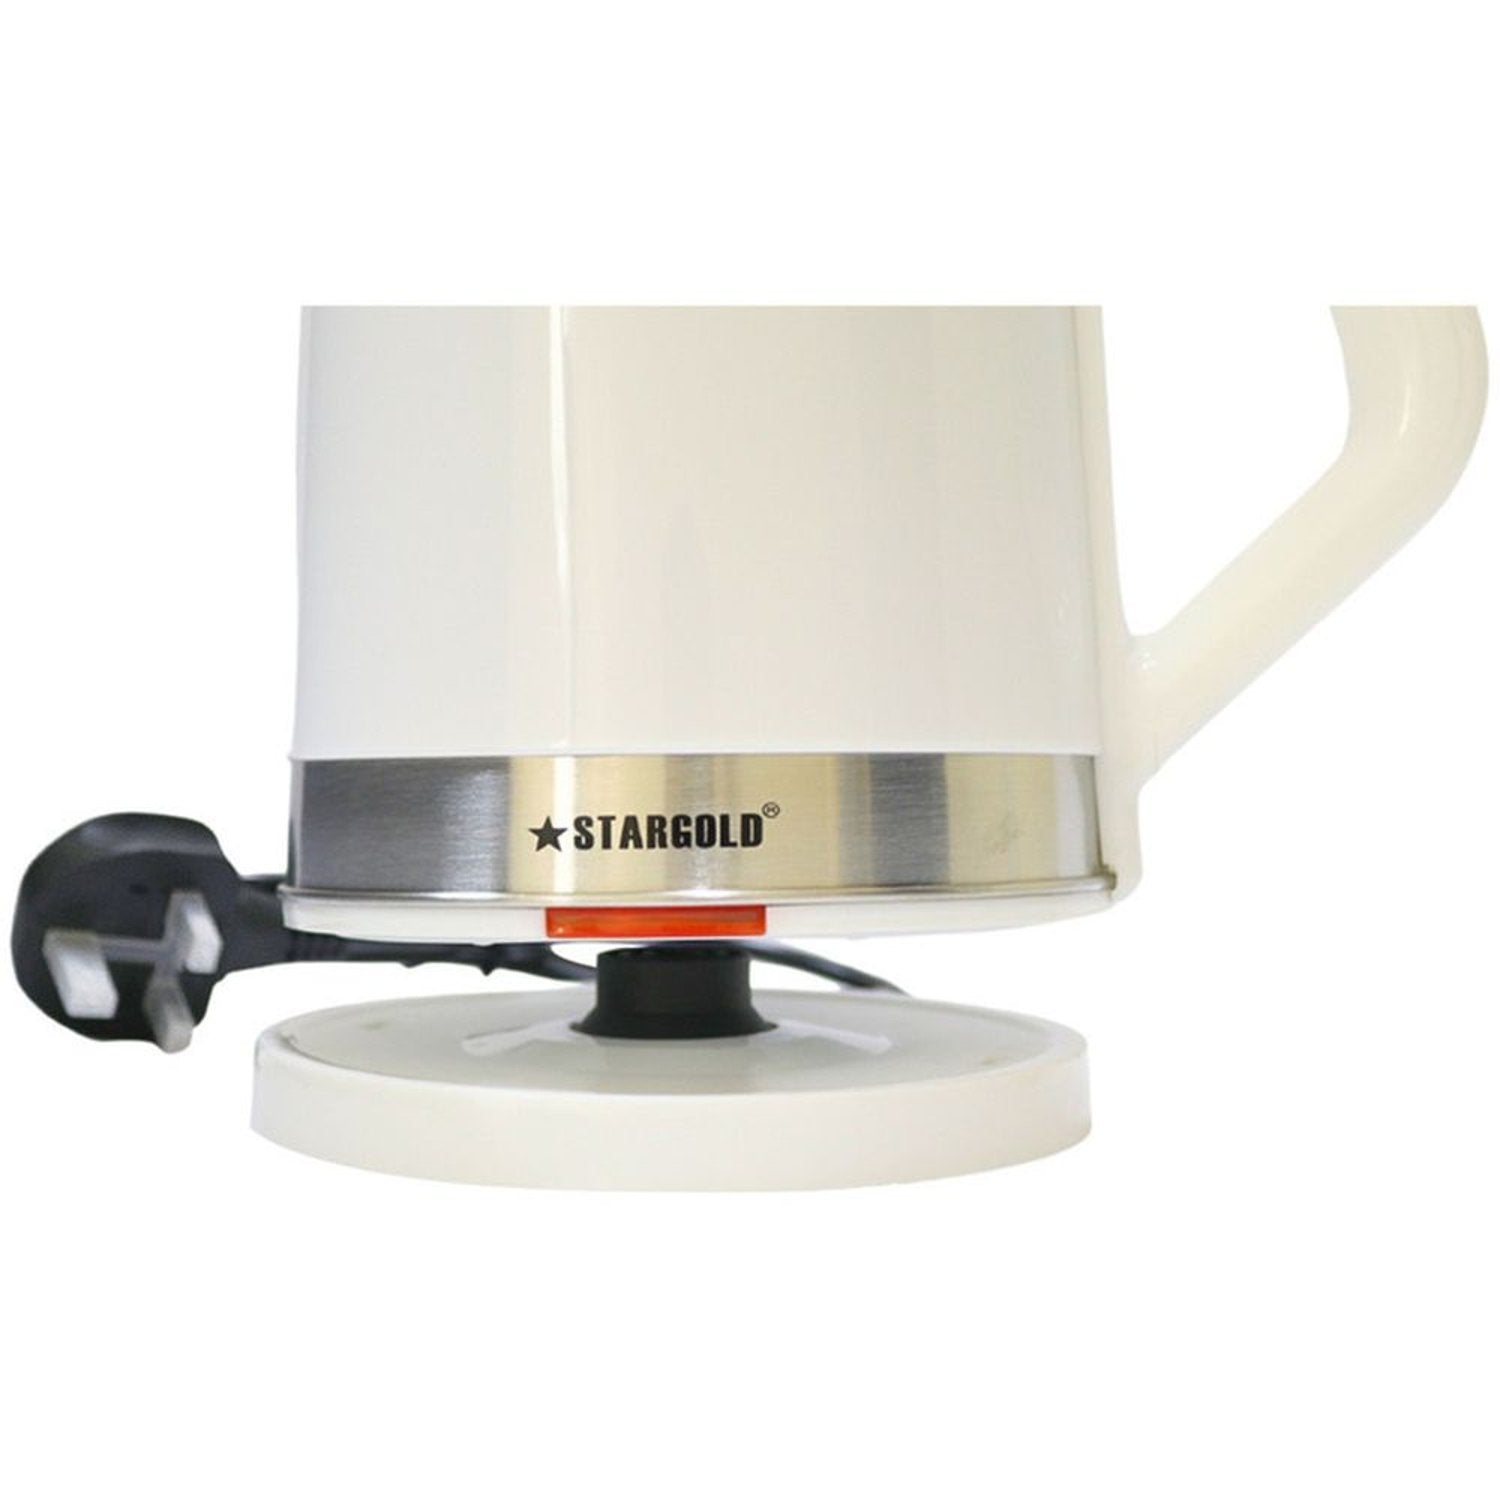 Stargold Electric Kettle 2L with Auto Turn-Off 1850W - SG-1462